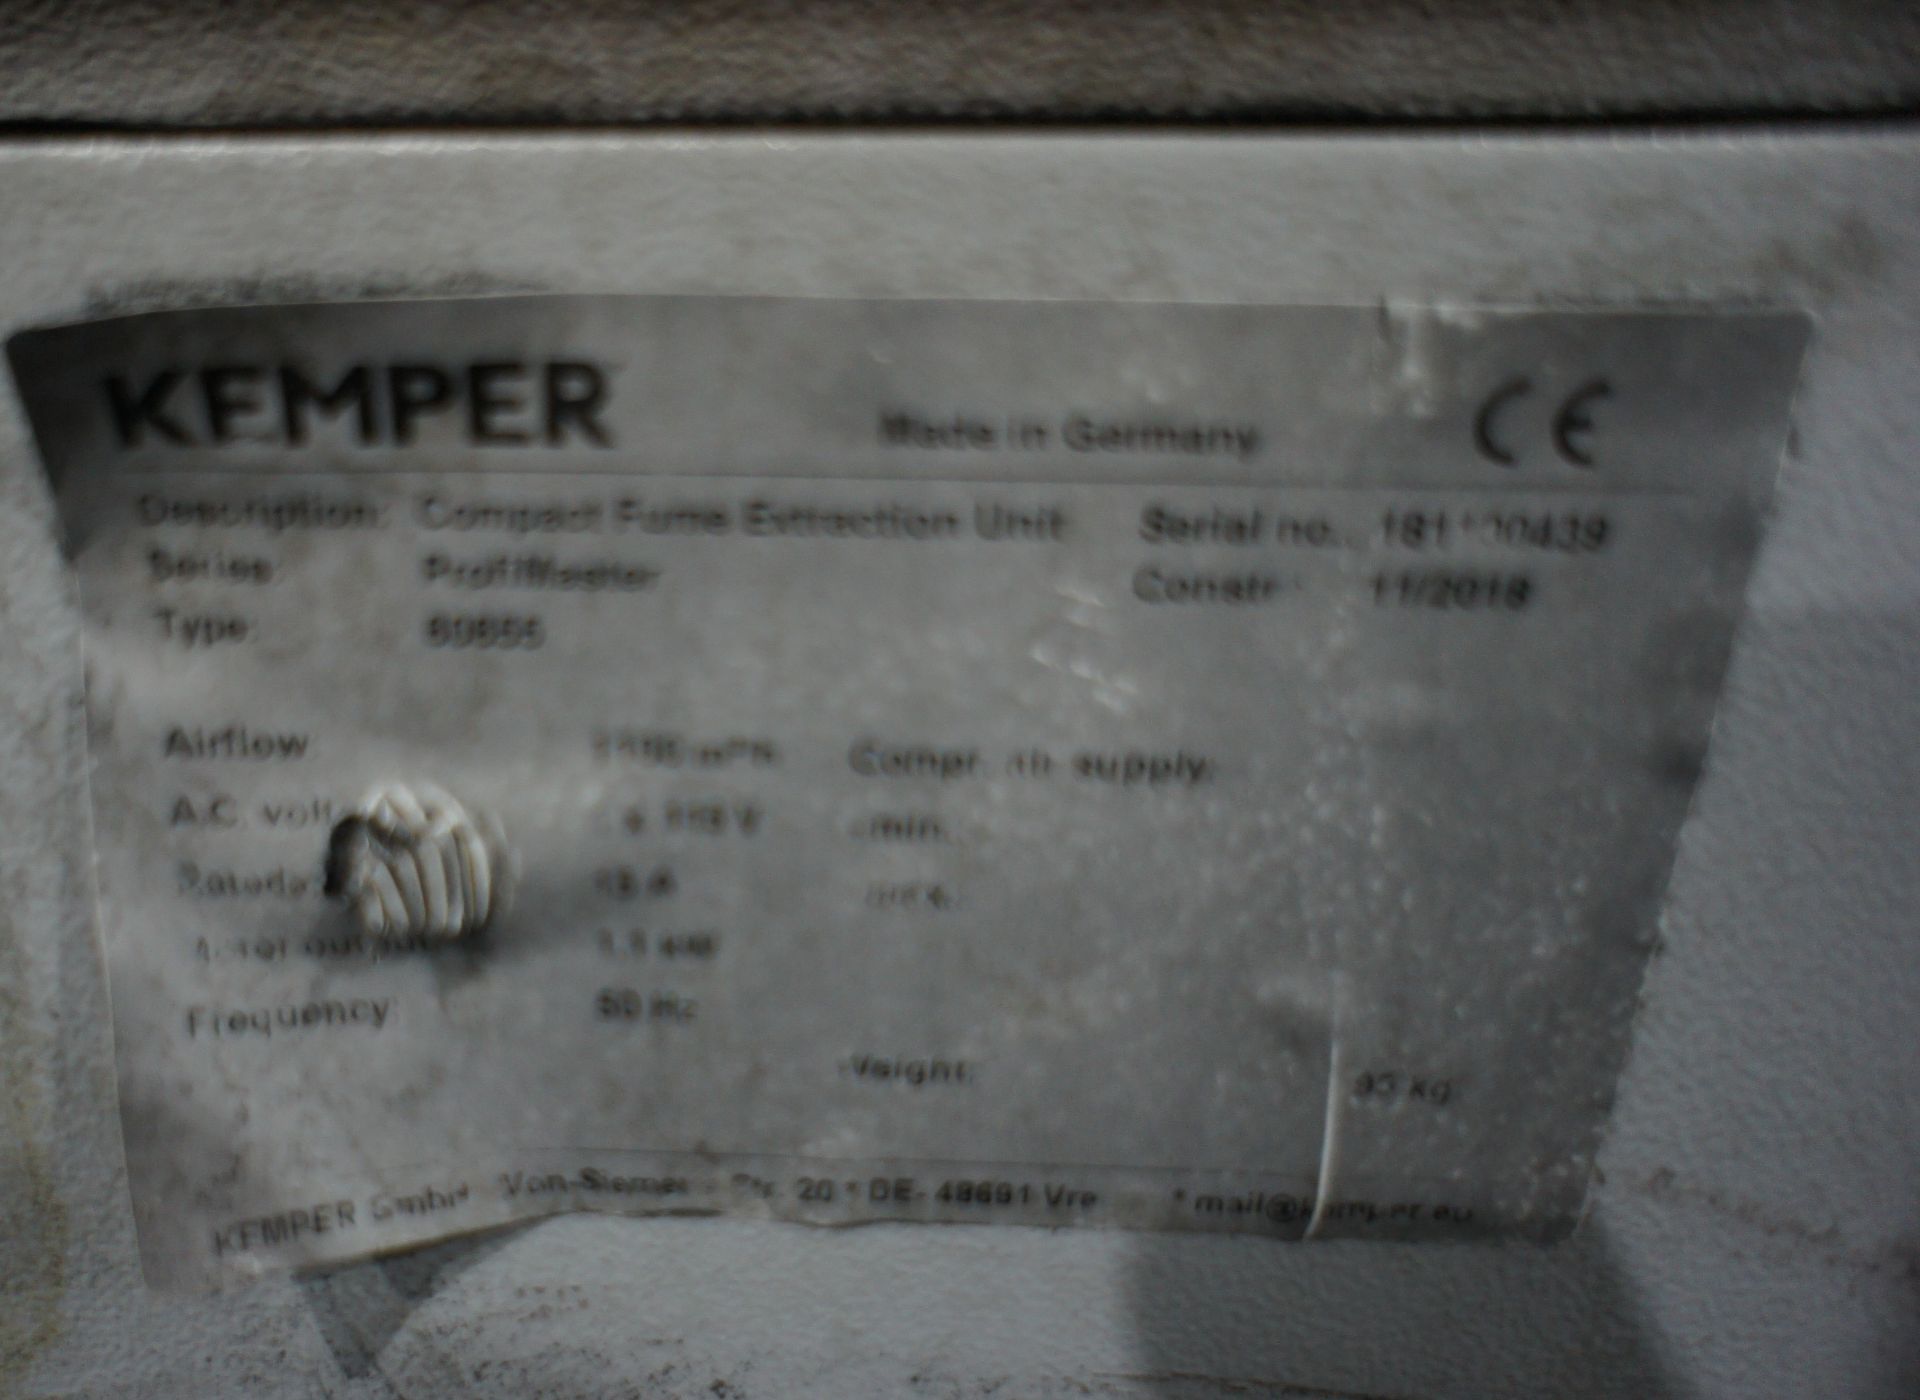 Kemper Profimaster compact fume extractor, - Image 2 of 4